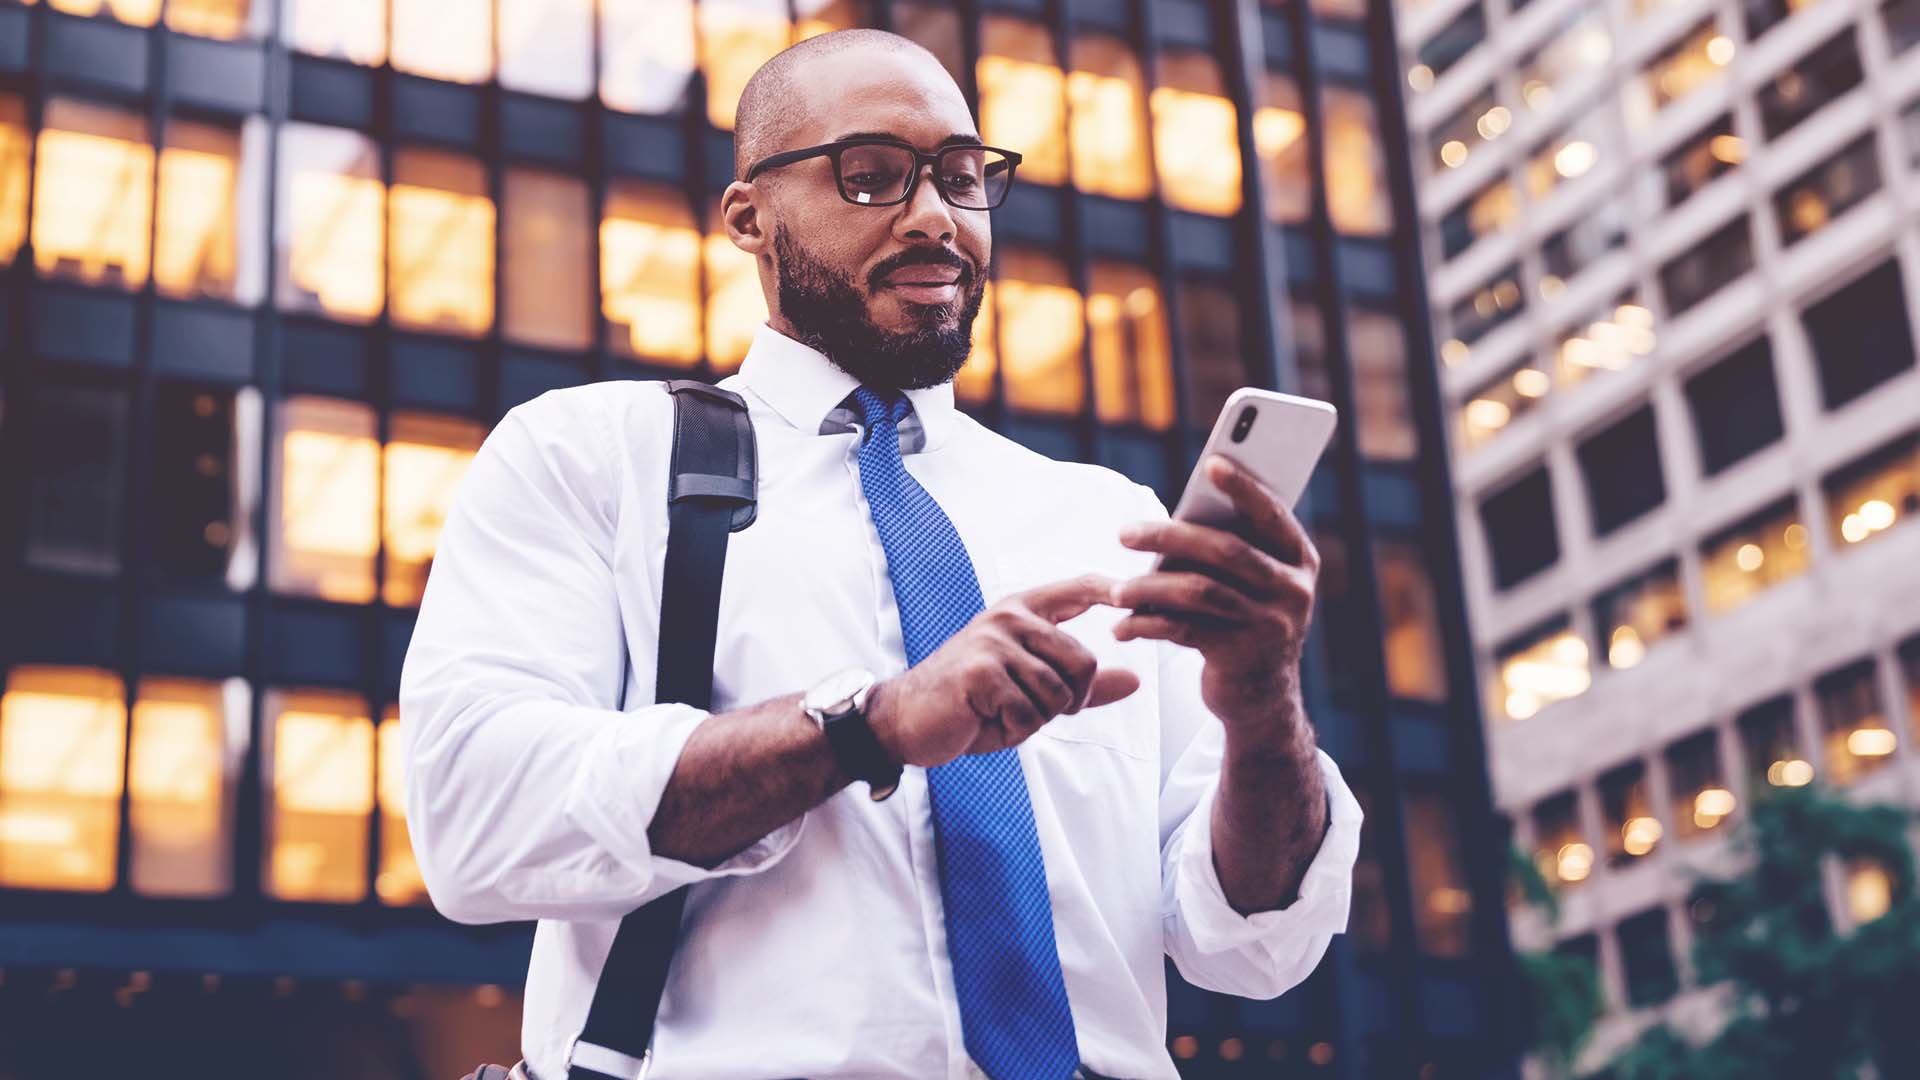 Professional man looking at his phone while outside among office buildings